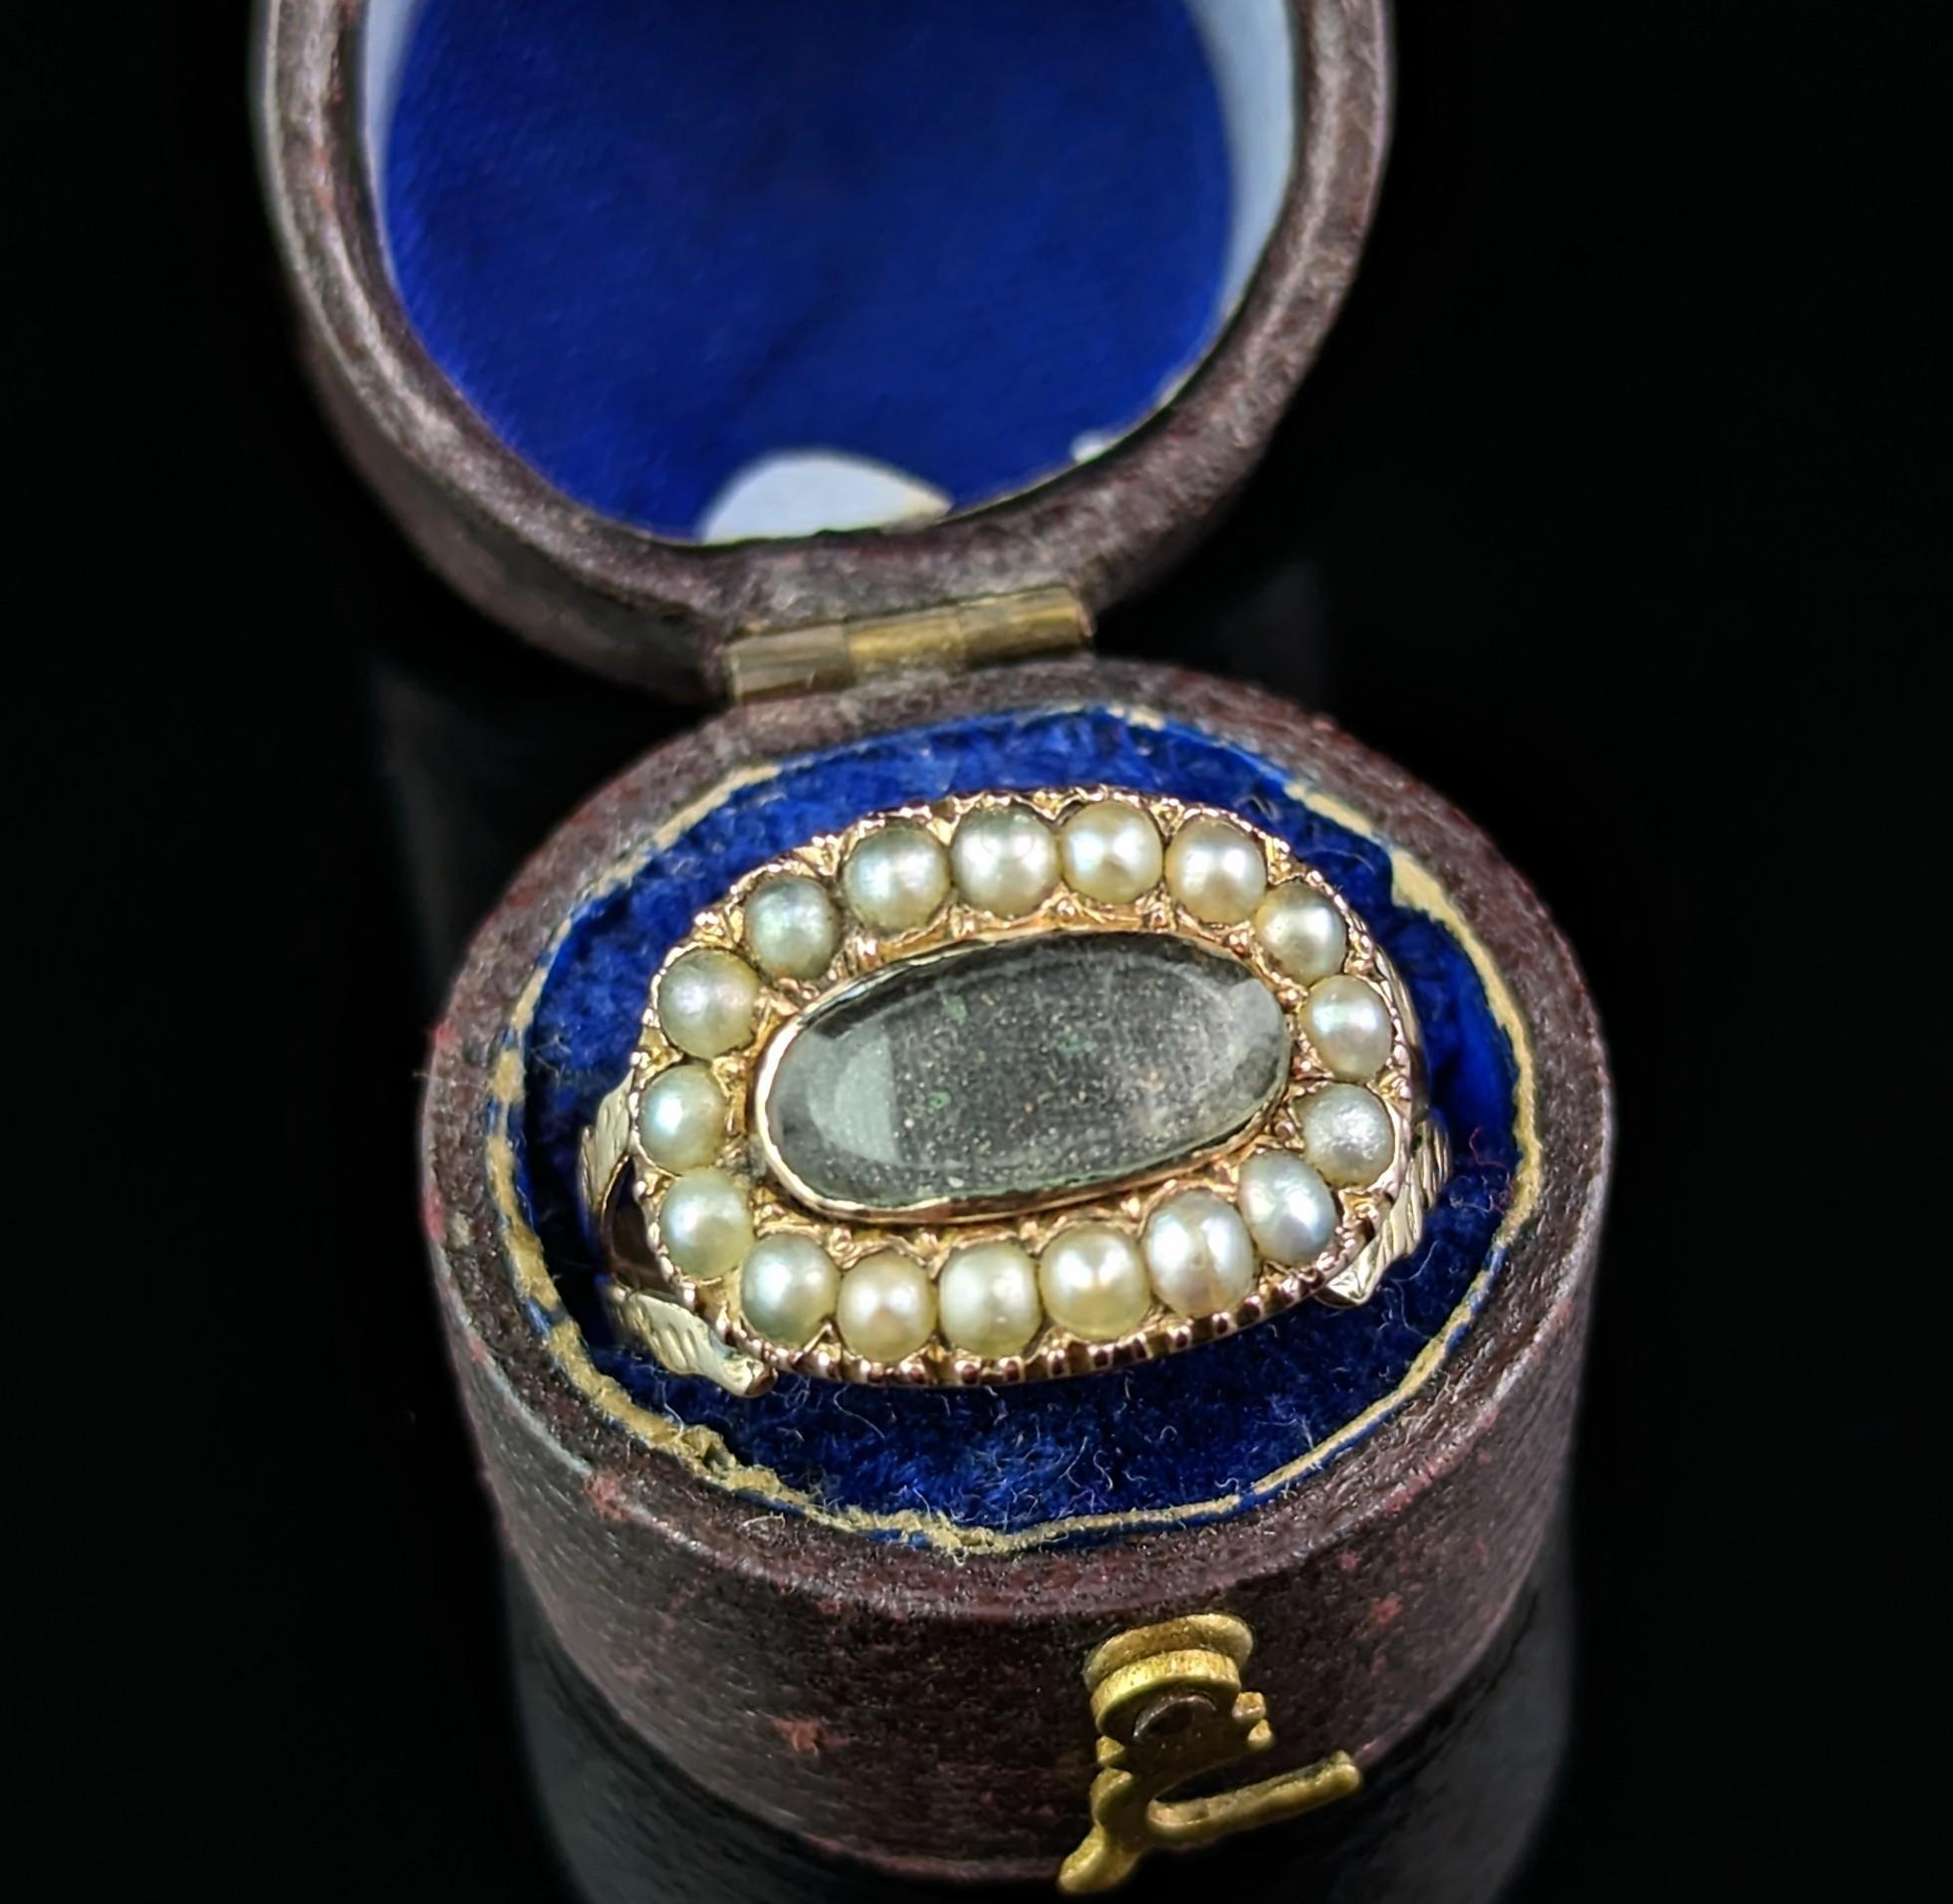 This charming antique Victorian Mourning ring is full of character and alluring melancholy romance as mourning pieces are usually both beautiful and sometimes sad reminders of sacre loved ones.

This has so many elements of Georgian styling to it